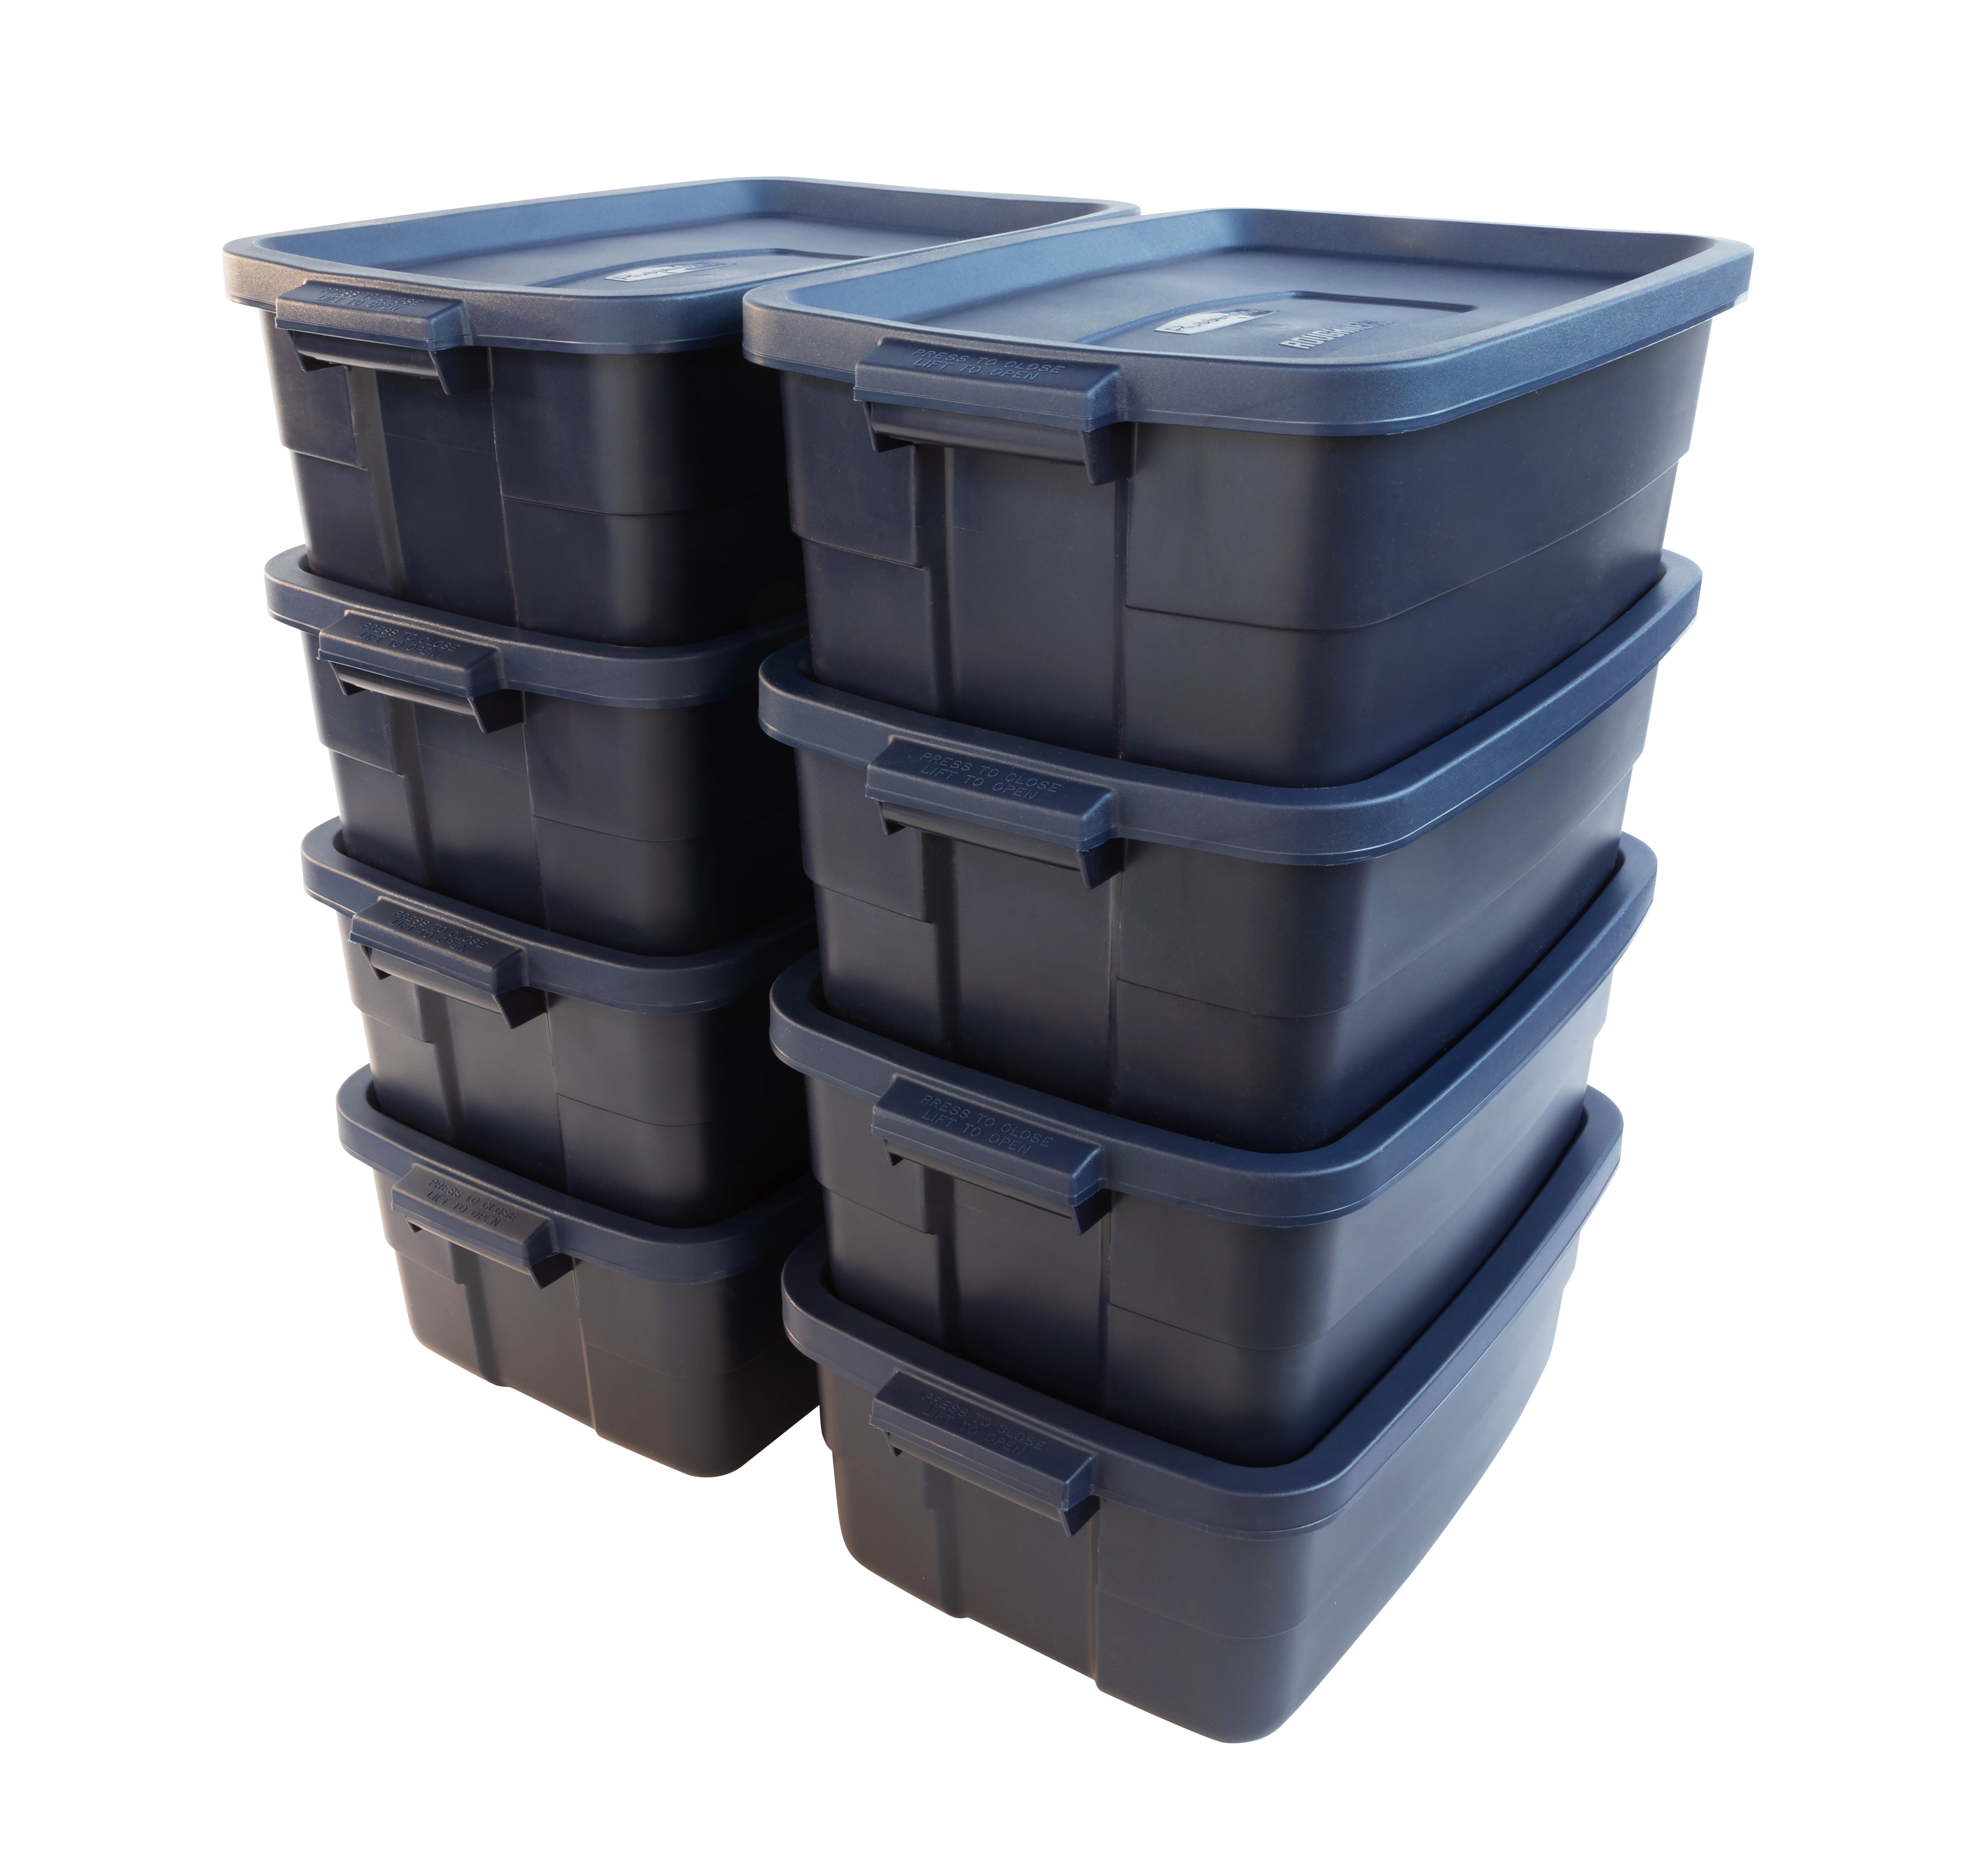 Rubbermaid Roughneck Tote 14-Gal. Storage Tote Container in Heritage Blue  (6-Pack) RMRT140015-6pack - The Home Depot